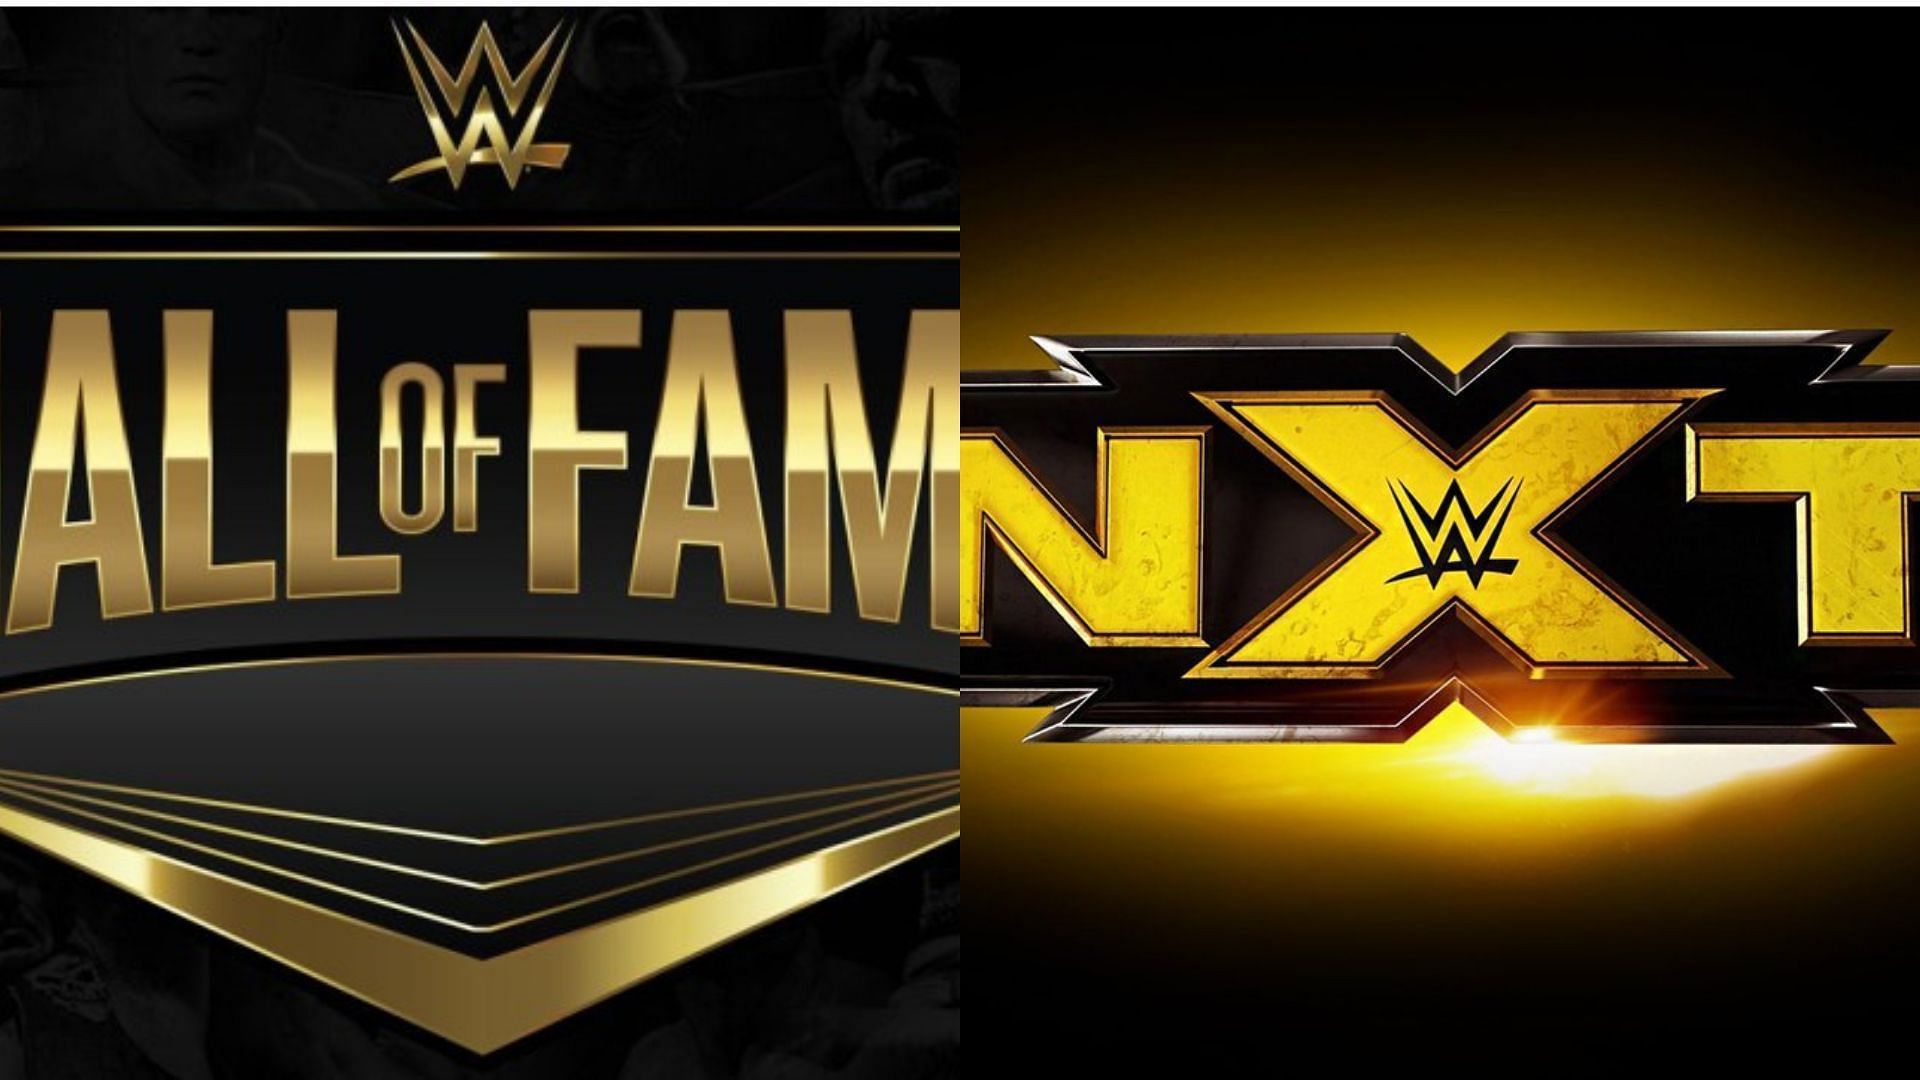 The Hall of Famer reacted the major announcement on NXT